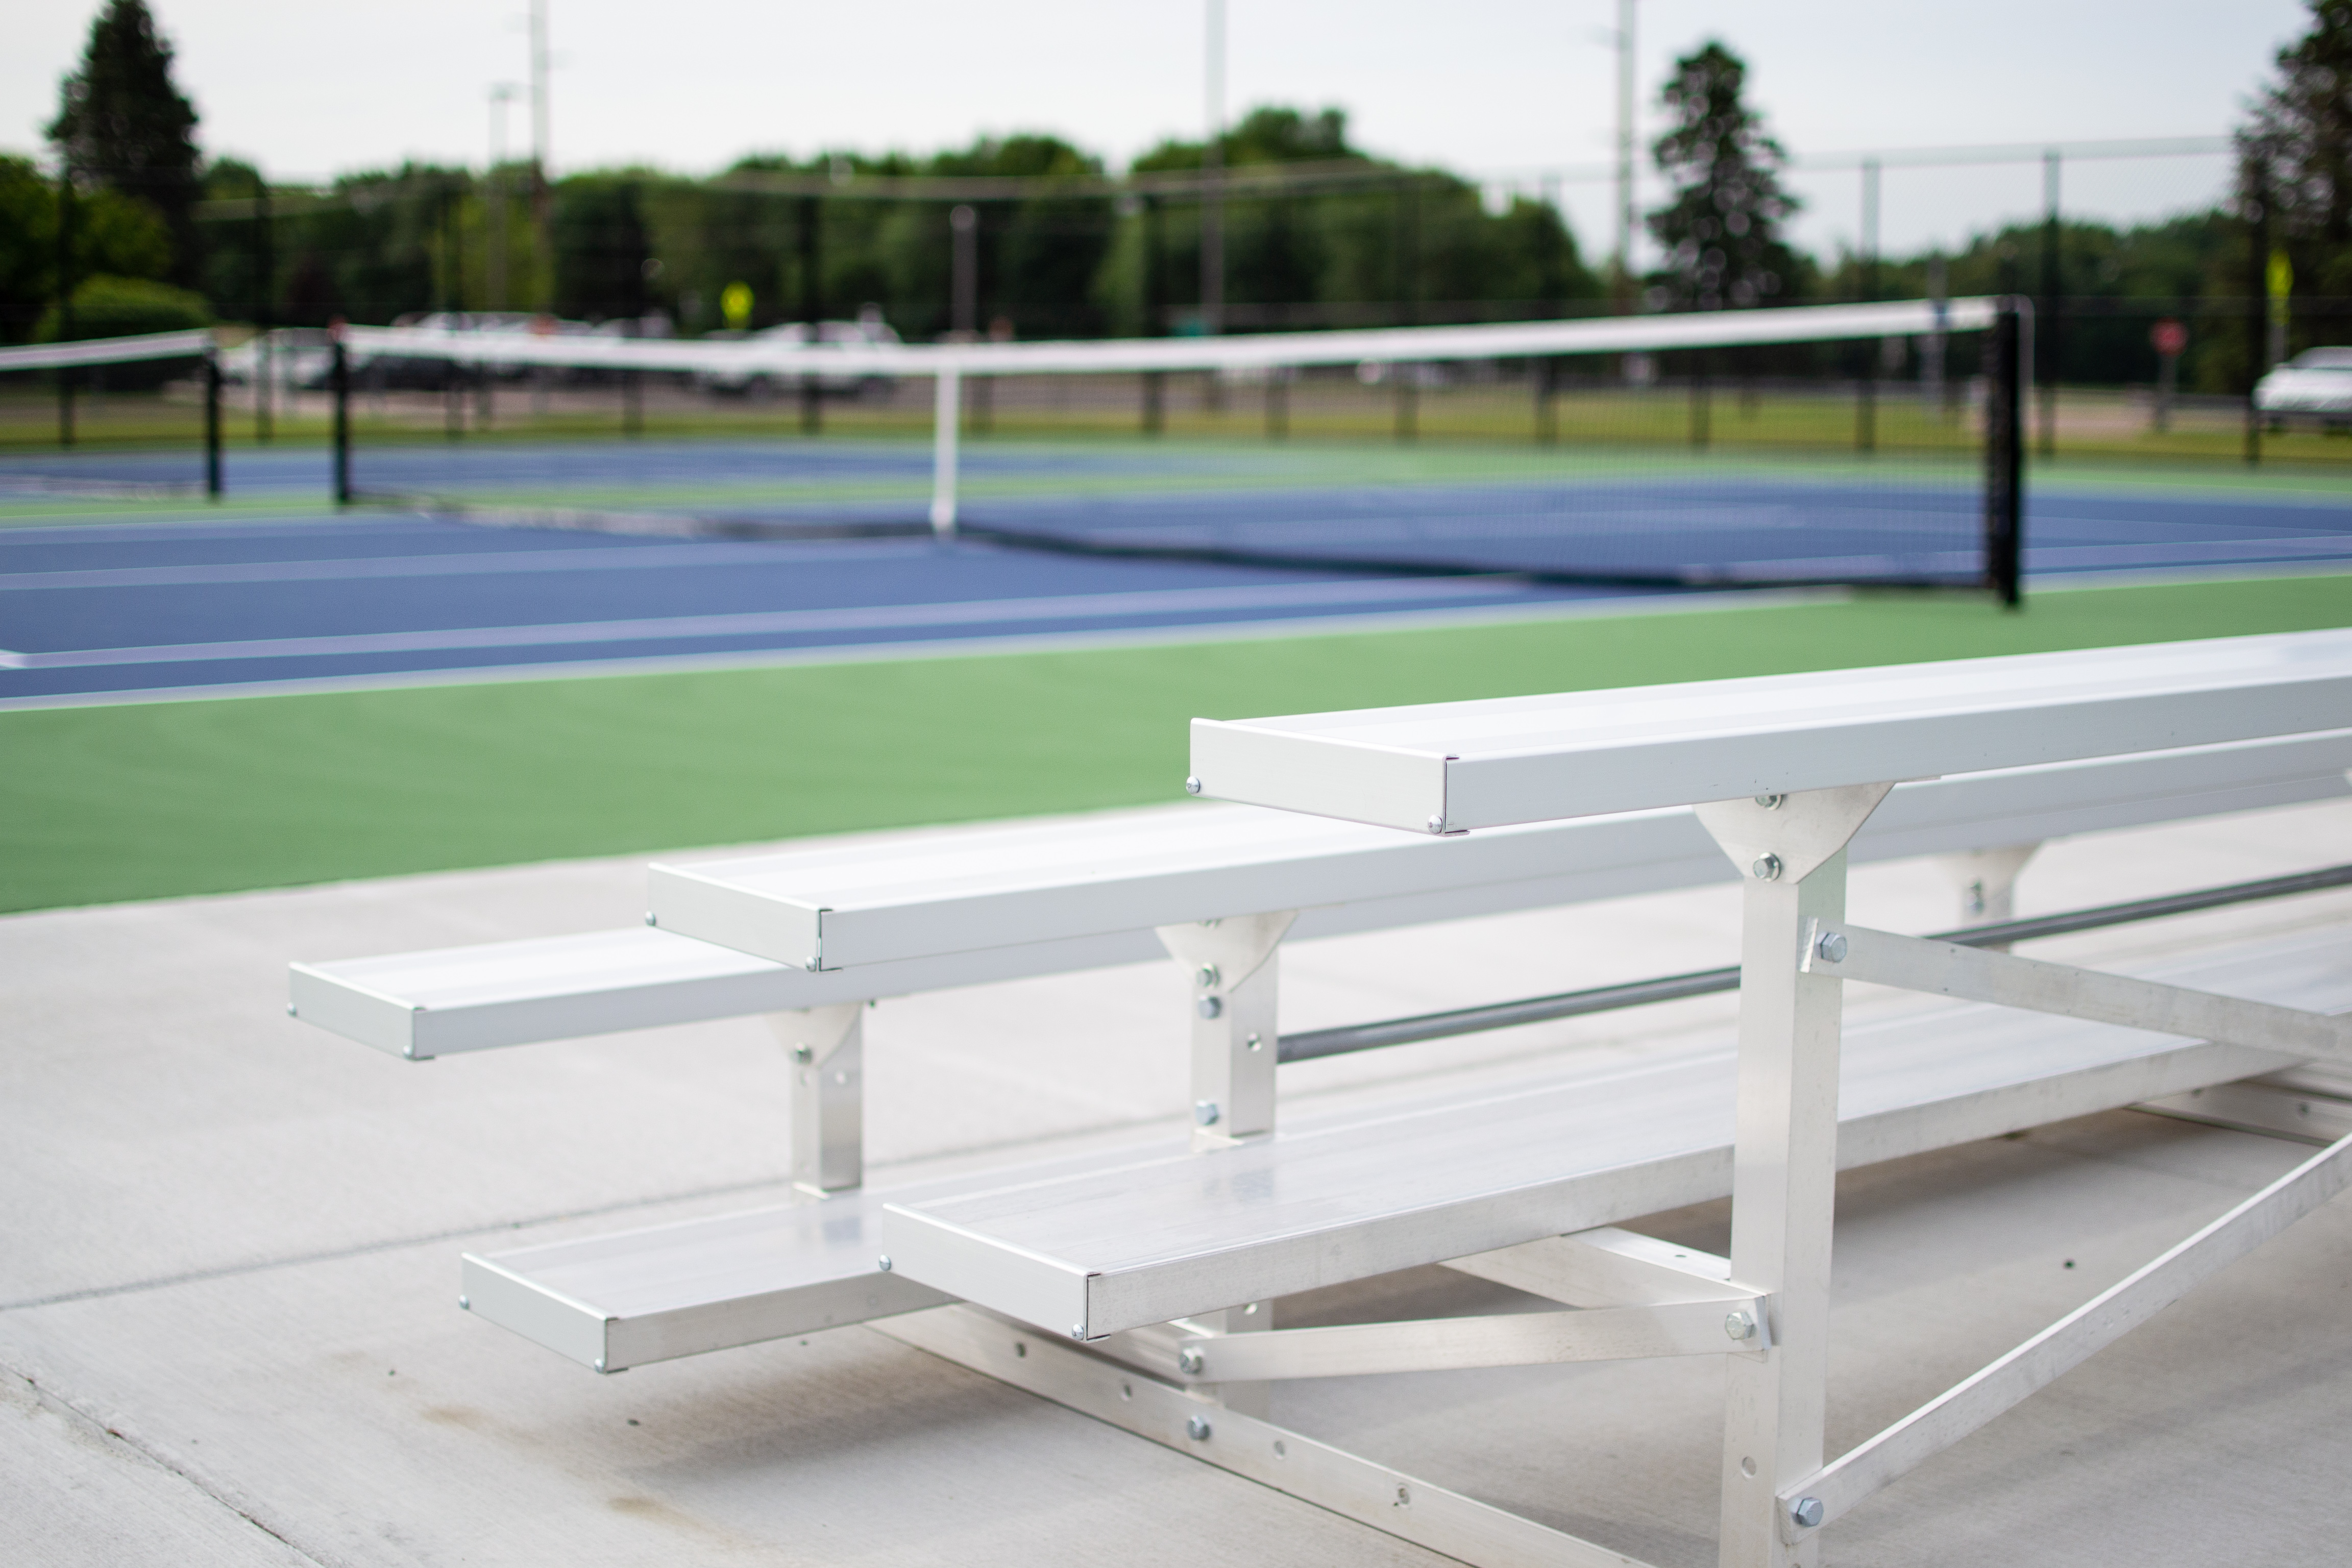 Chisago Lakes Tennis Courts - 6